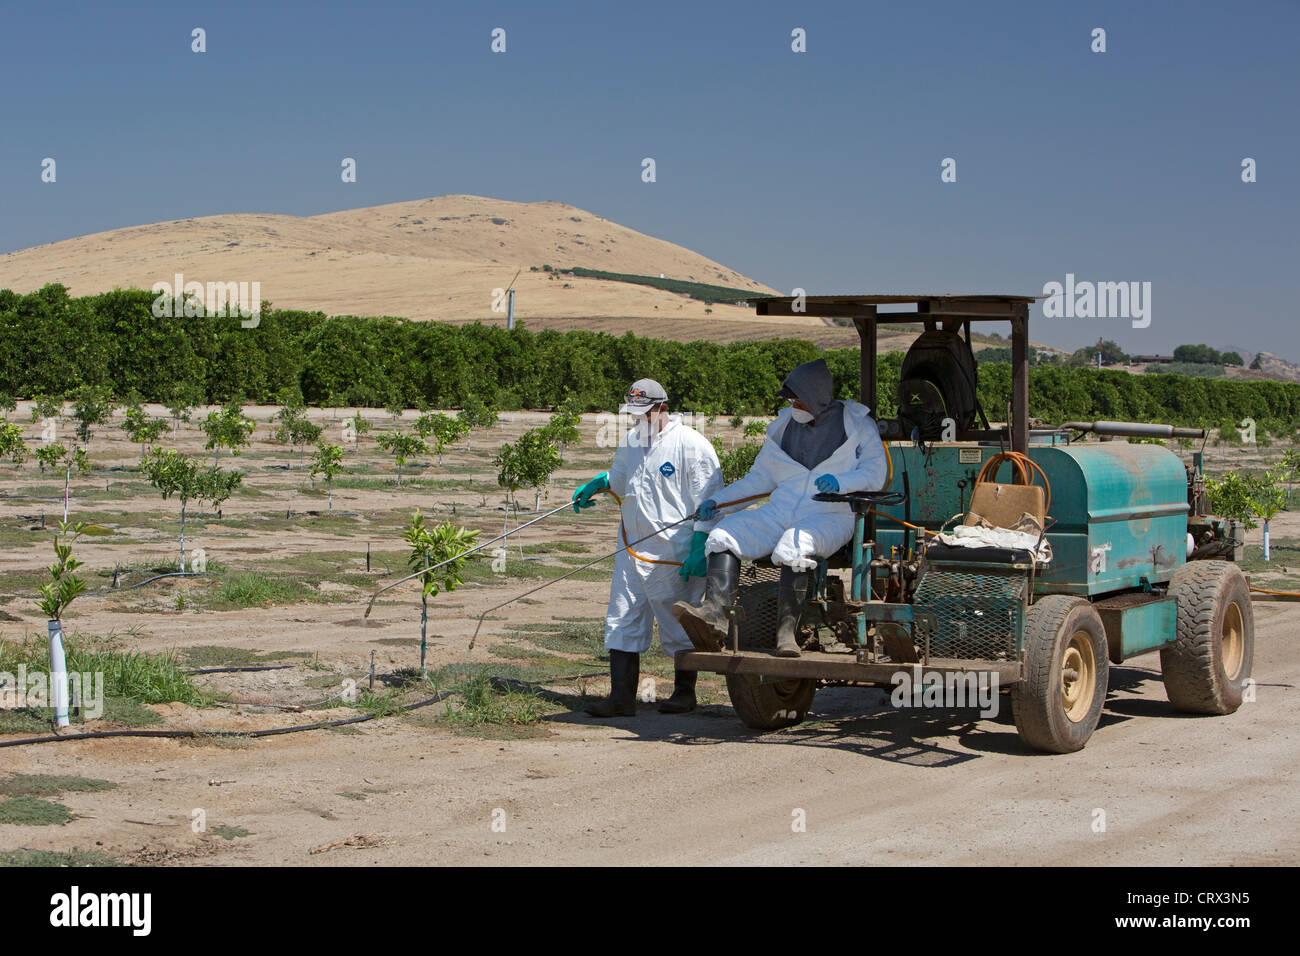 Woodlake, California - Workers in protective clothing apply pesticide to a field in the San Joaquin Valley. Stock Photo